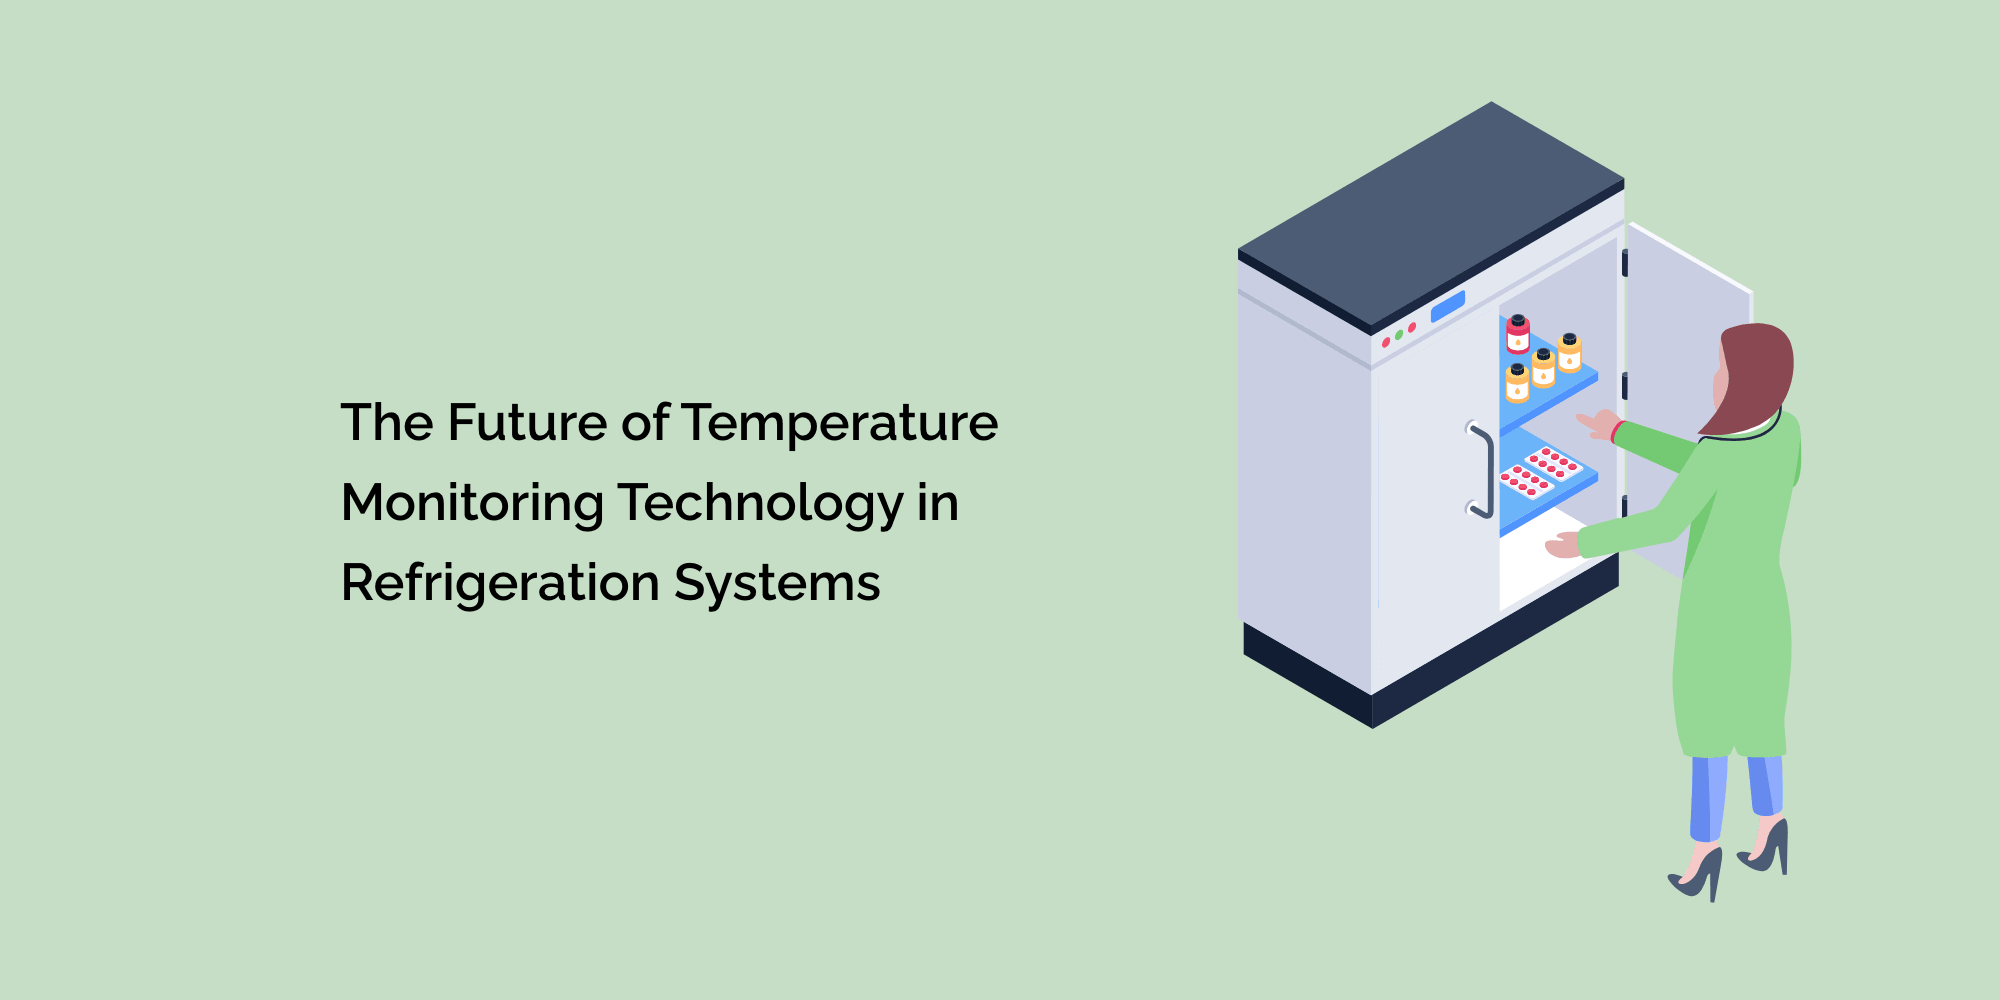 The Future of Temperature Monitoring Technology in Refrigeration Systems